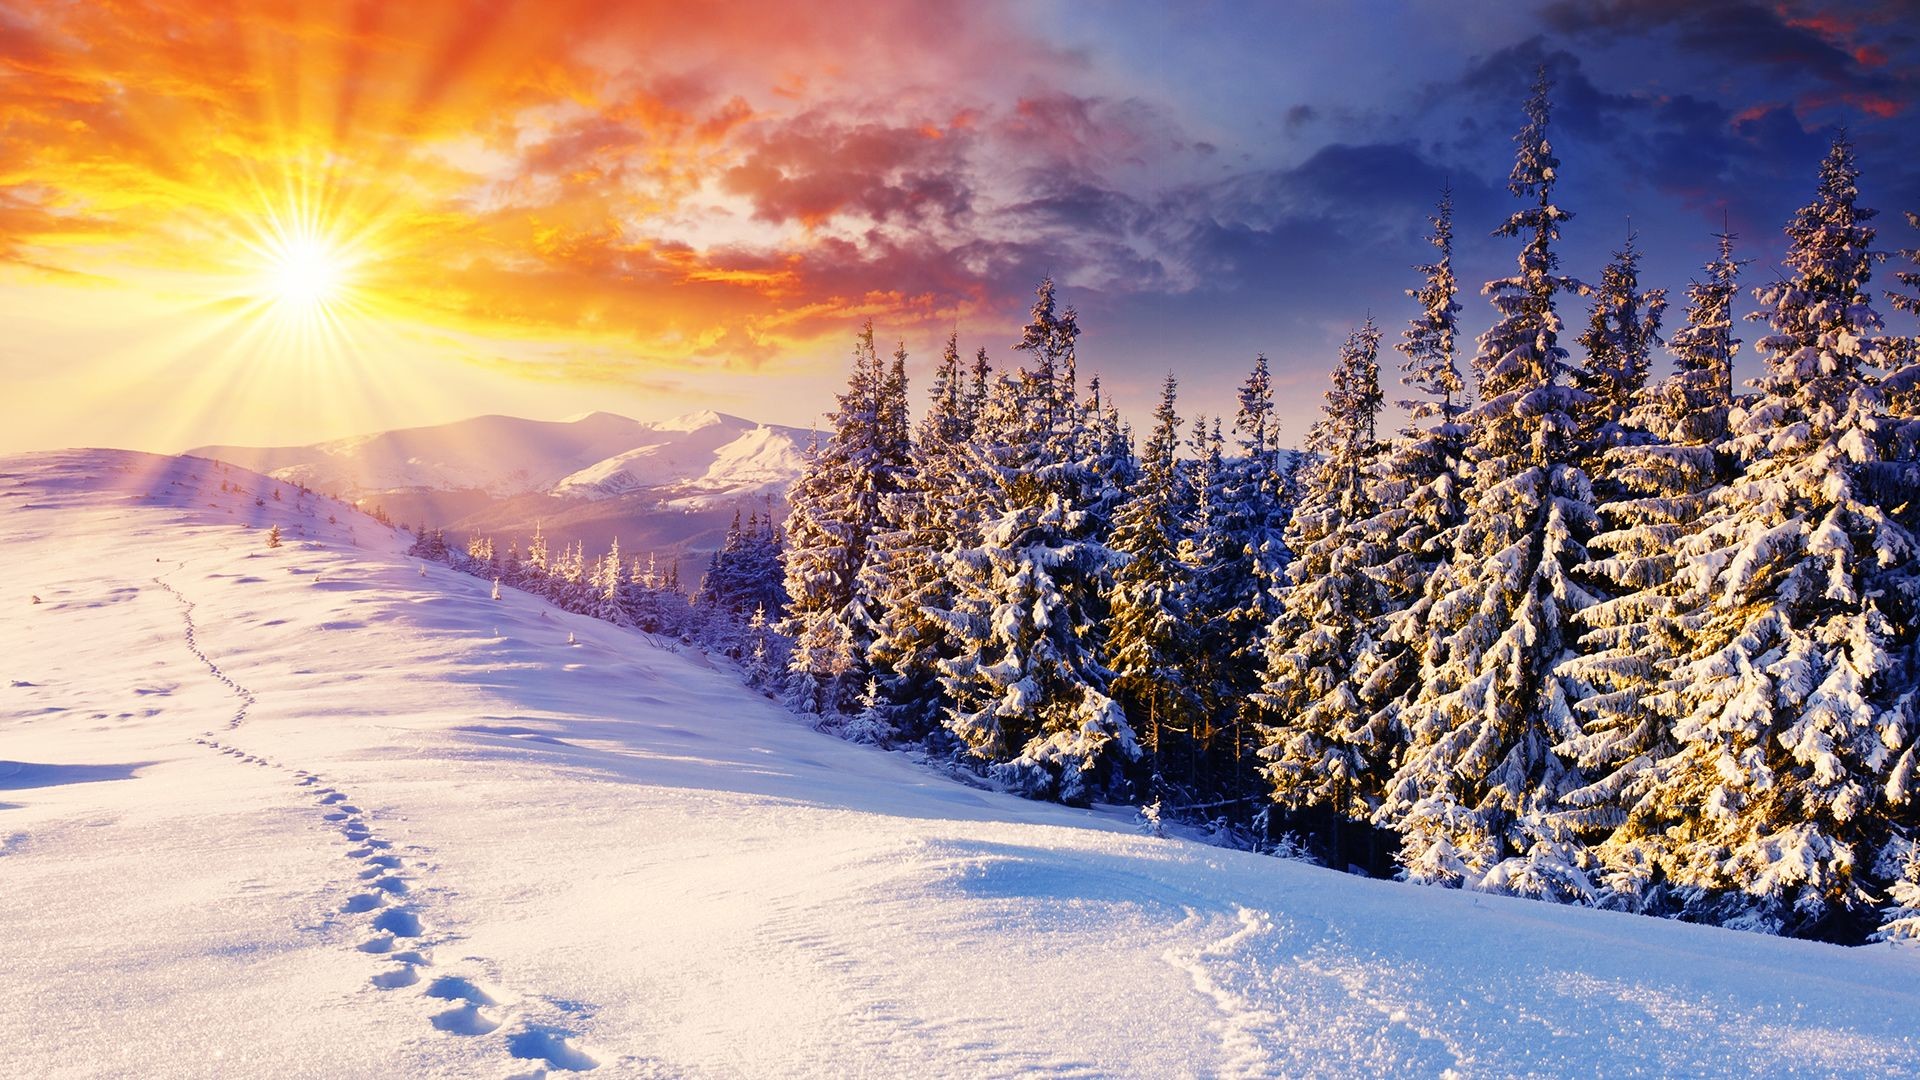 1920x1080 Winter Sunset Desktop Backgrounds Here you can f.